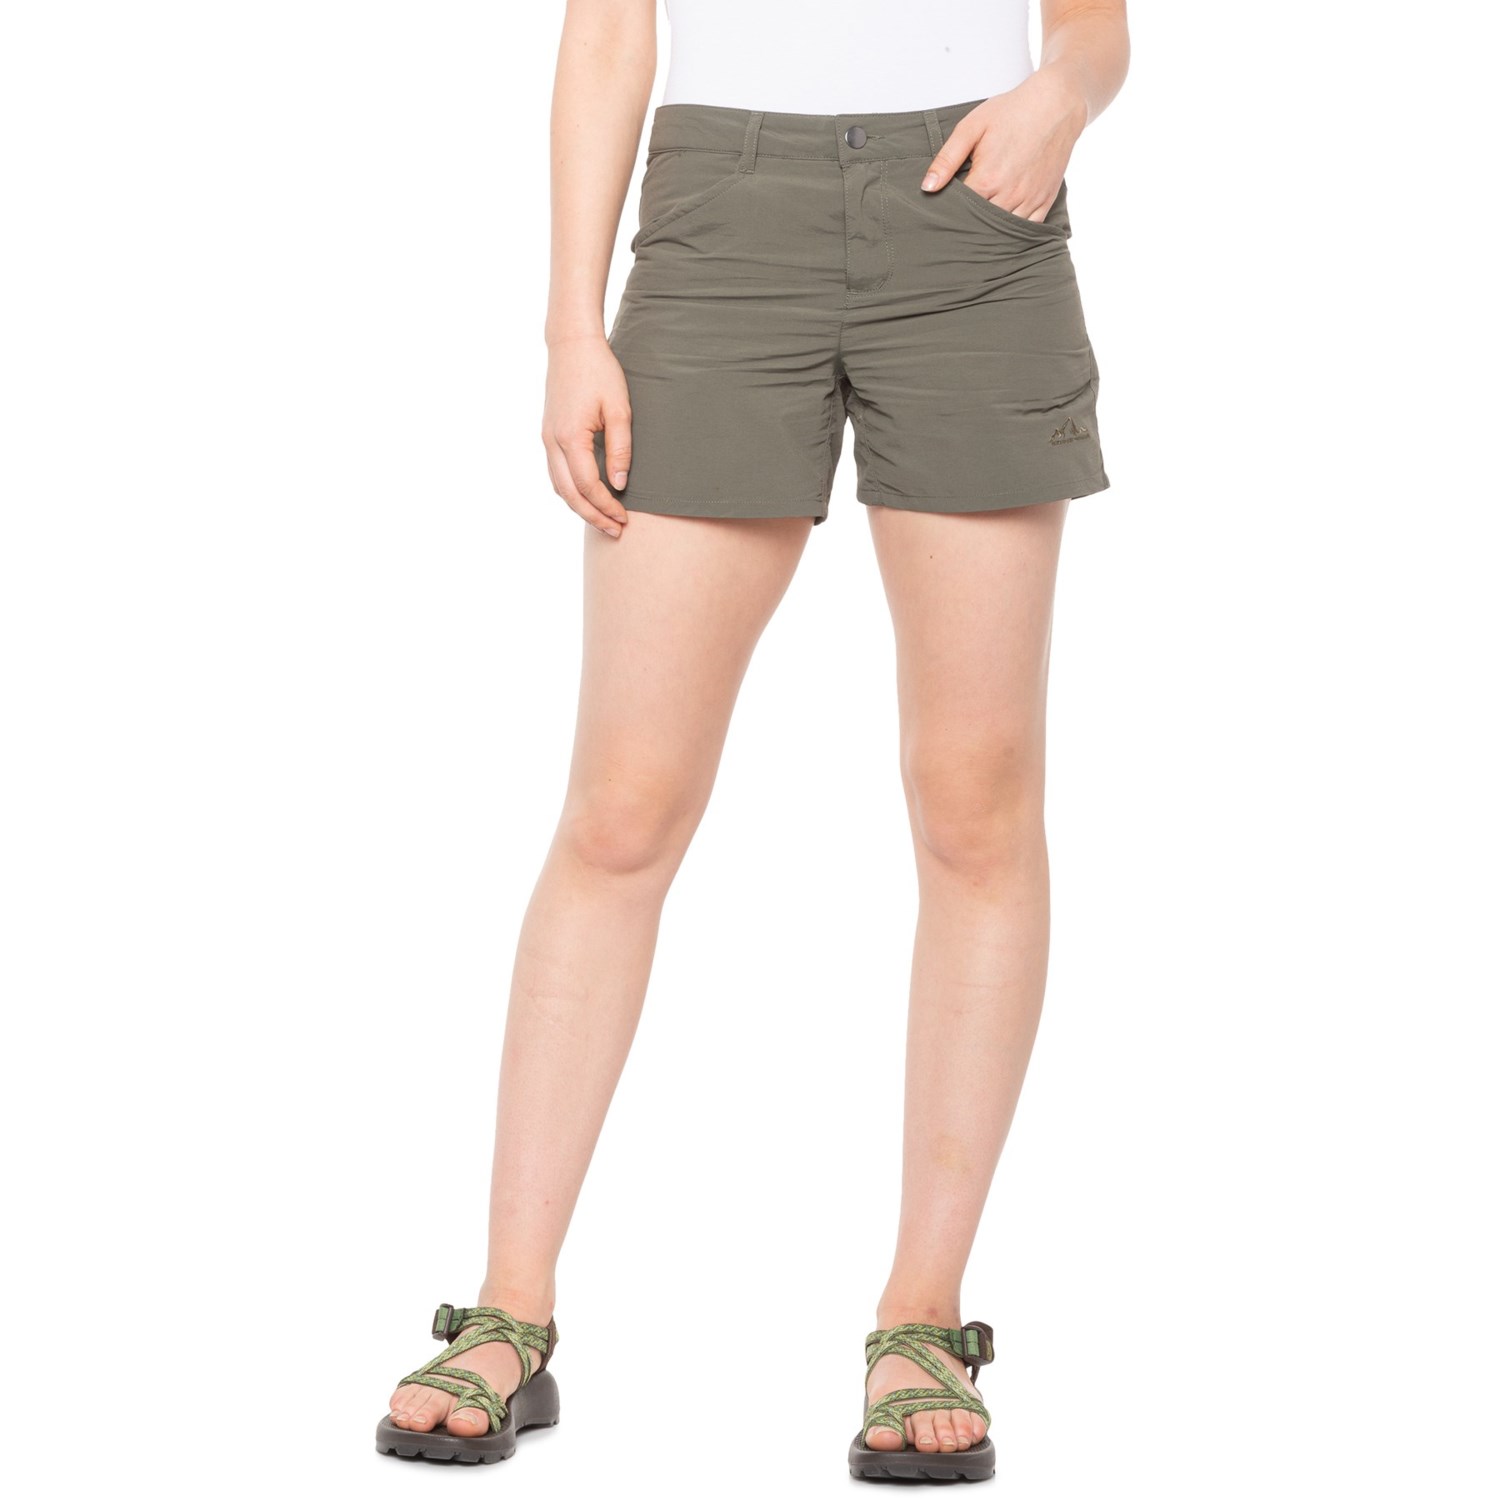 American Outback Quest Shorts (For Women) - Save 32%